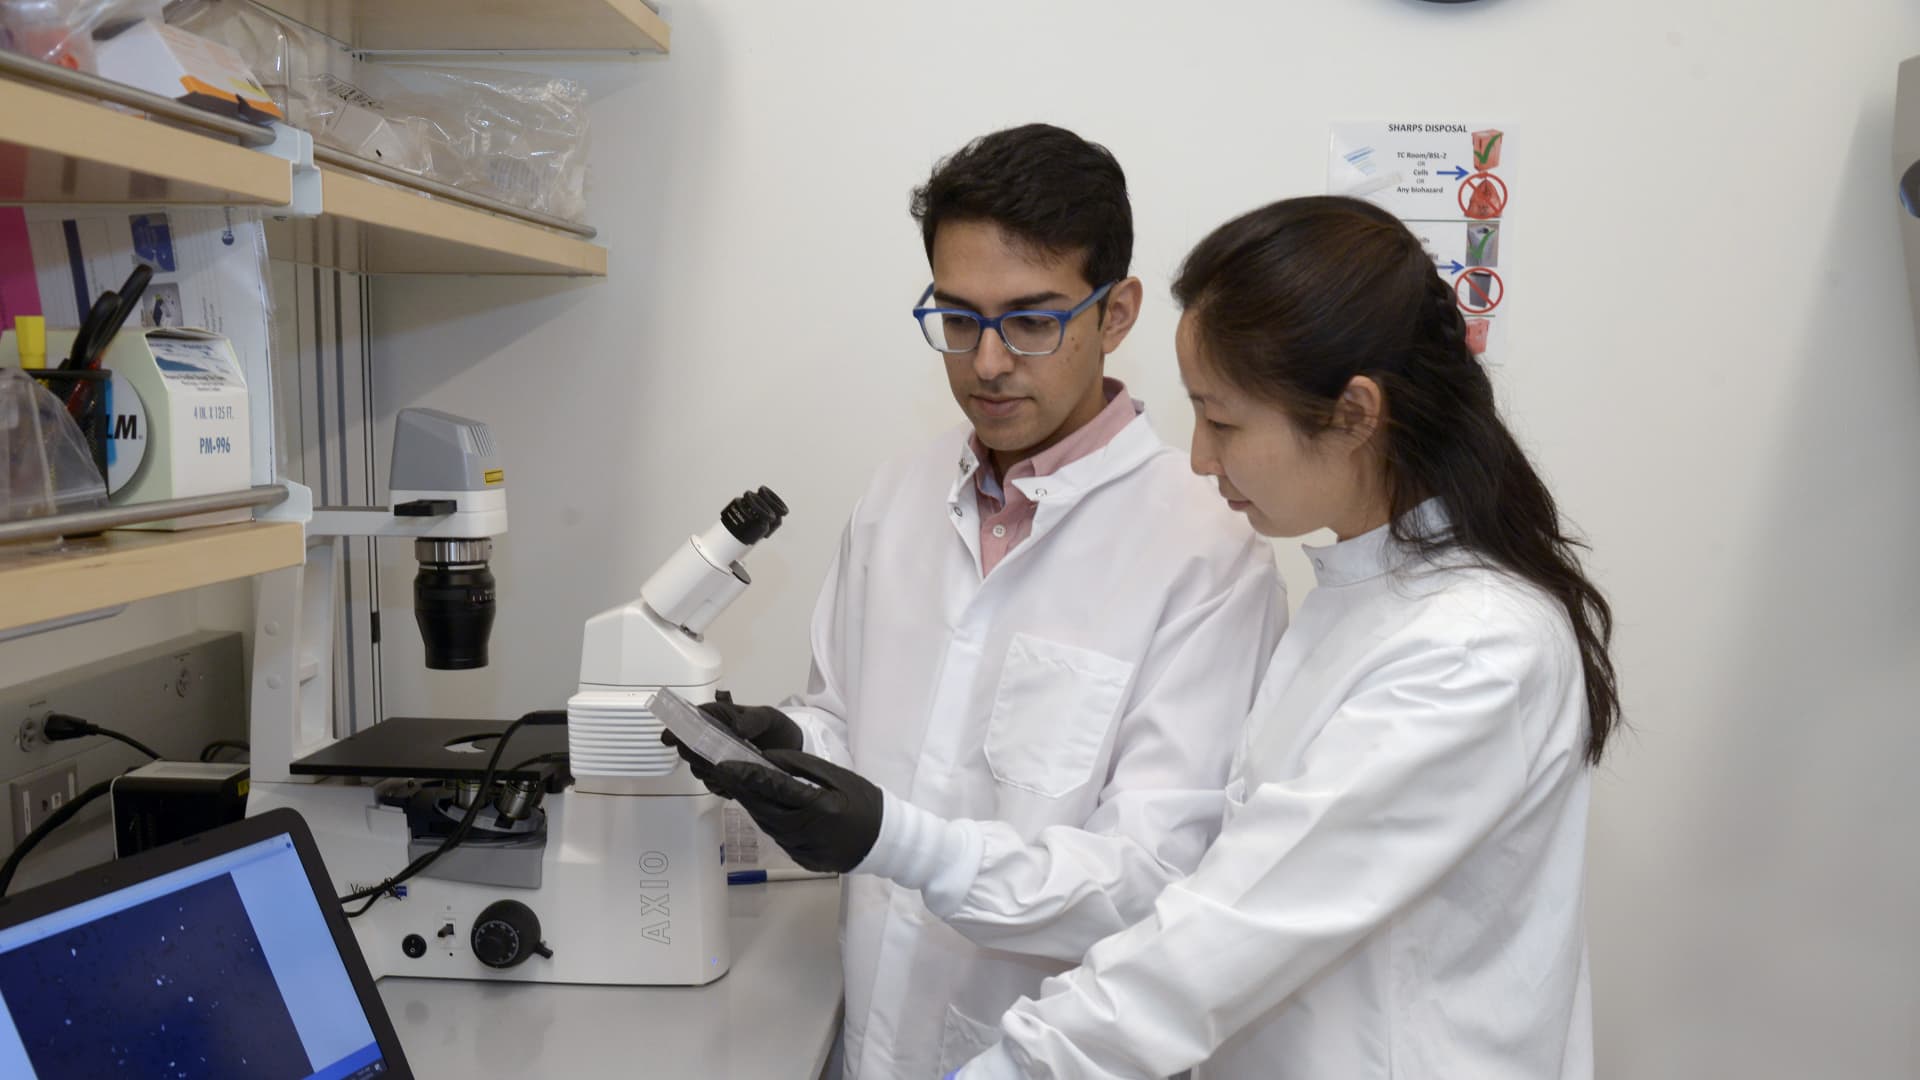 Dr. Neville Sanjana and his team at the New York Genome Center used CRISPR to identify the genes that can protect human cells against Covid-19.